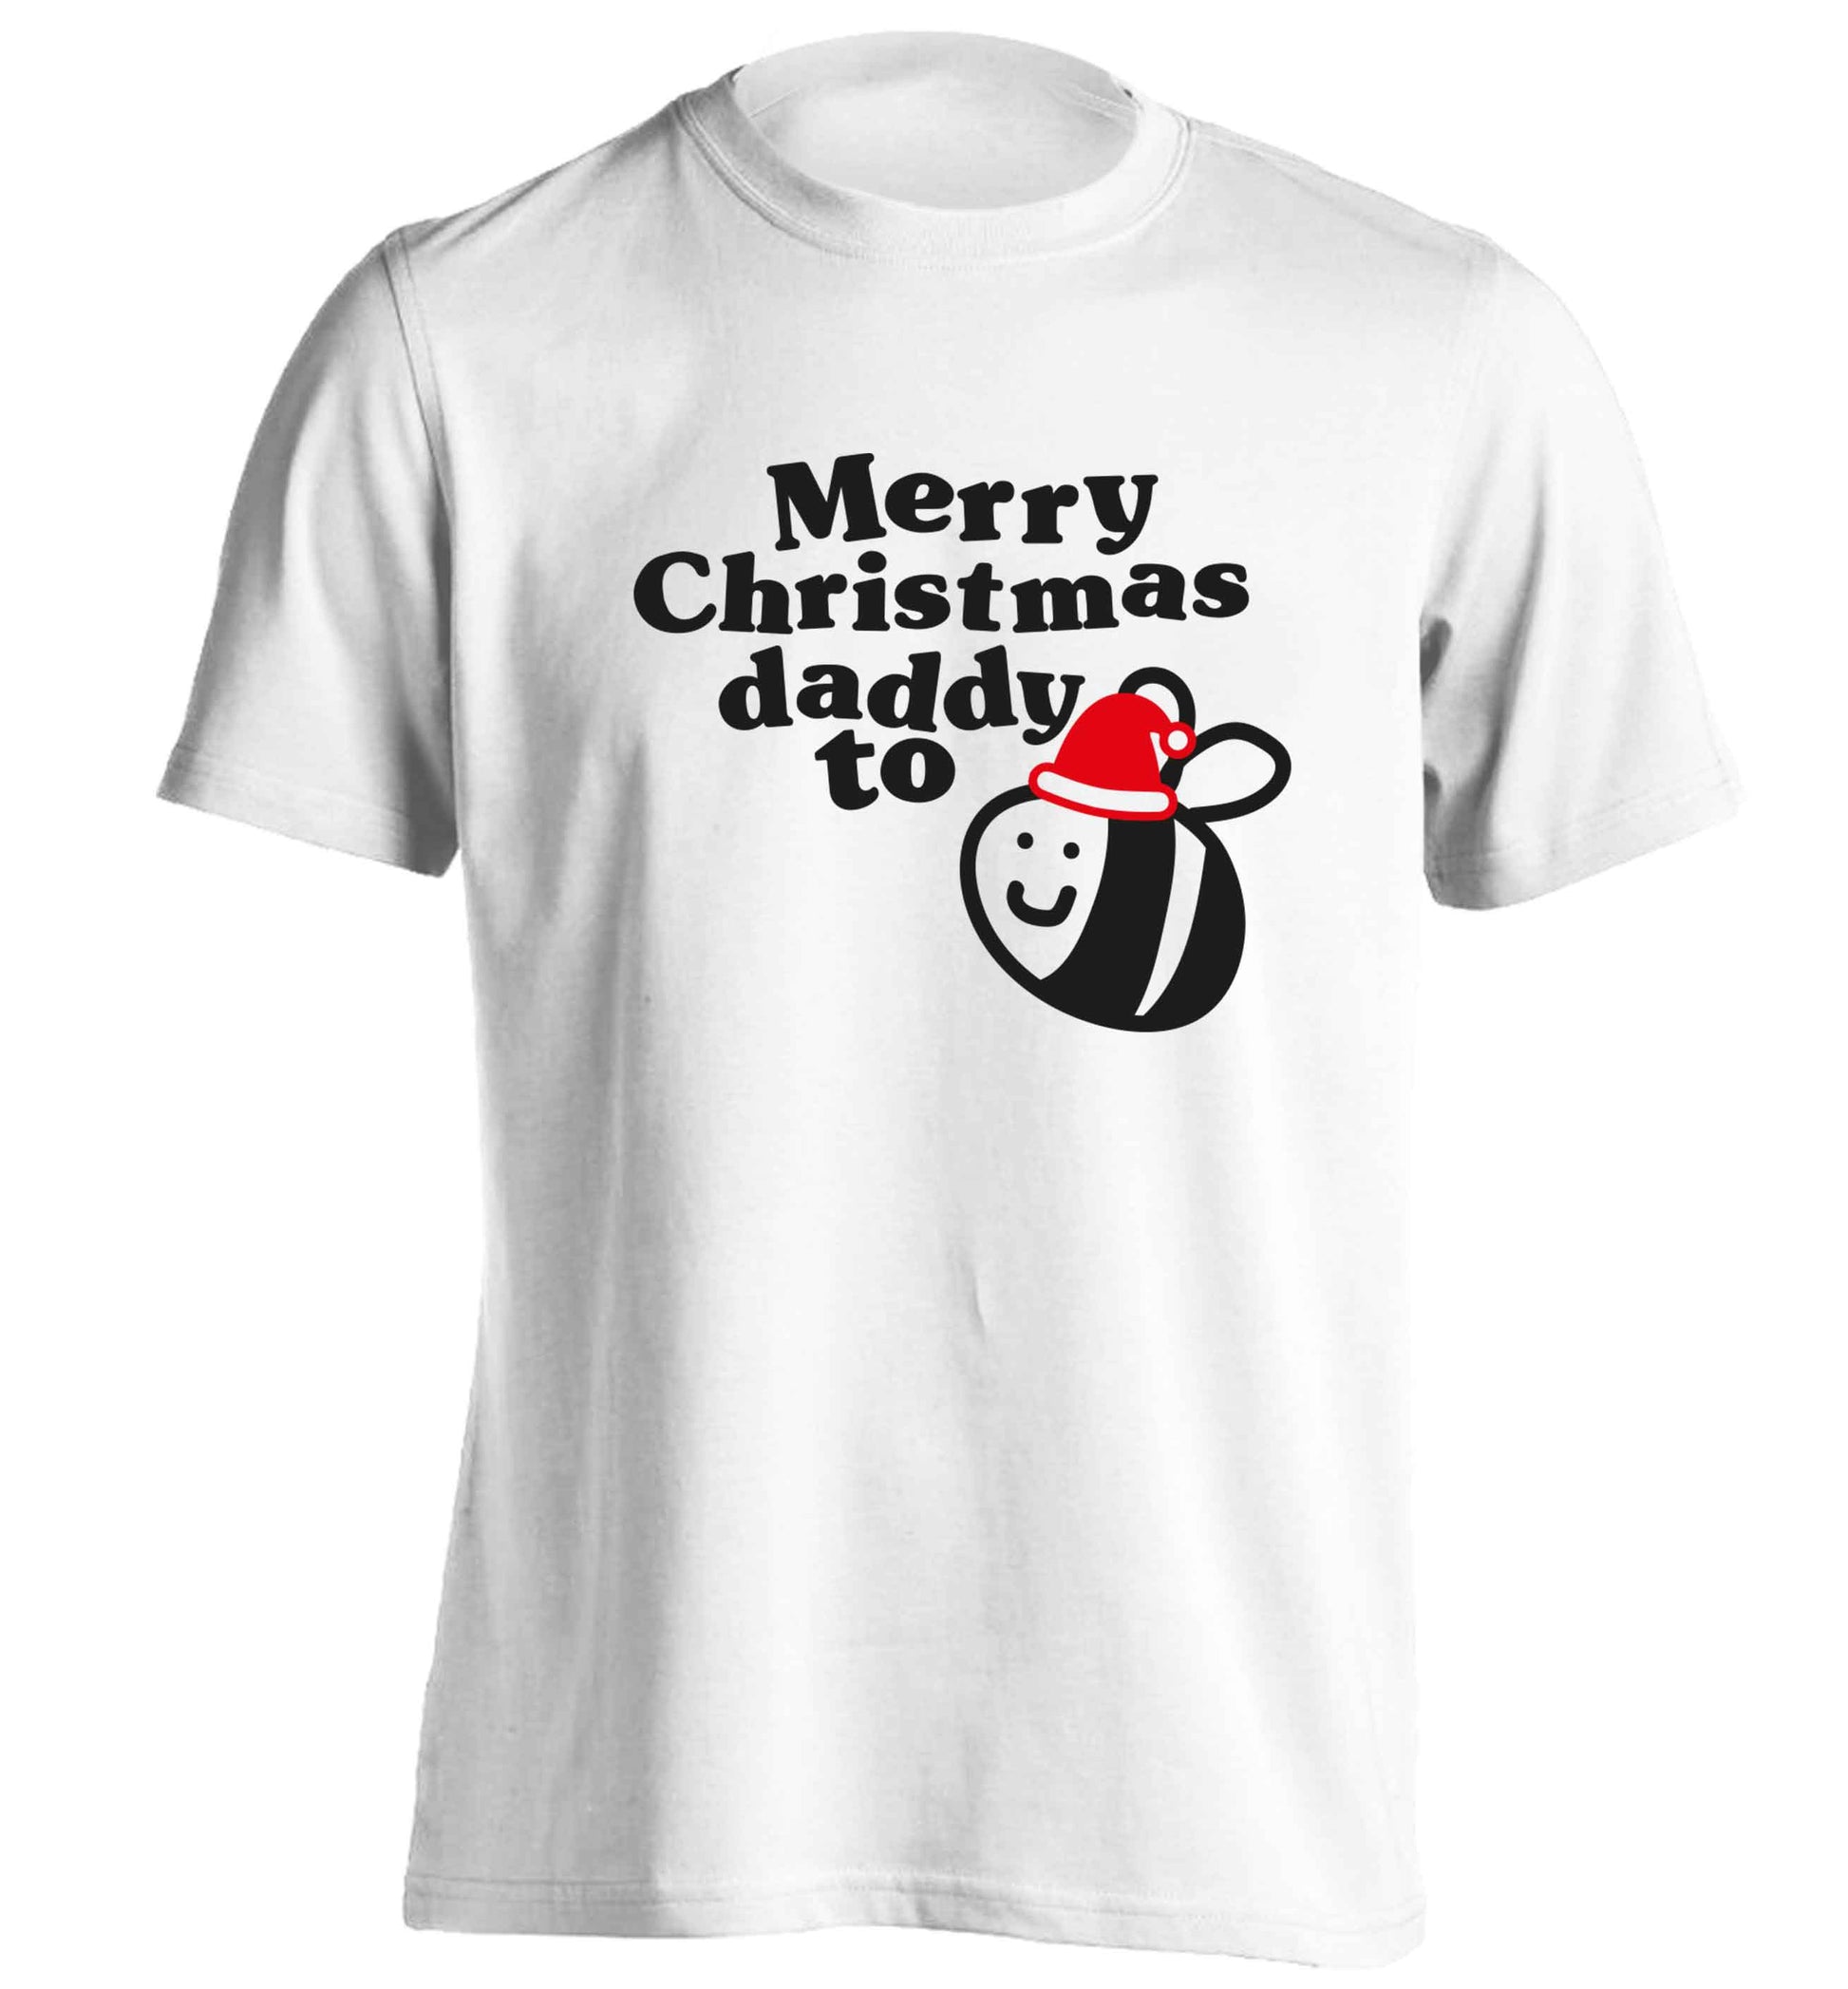 Merry Christmas daddy to be adults unisex white Tshirt 2XL